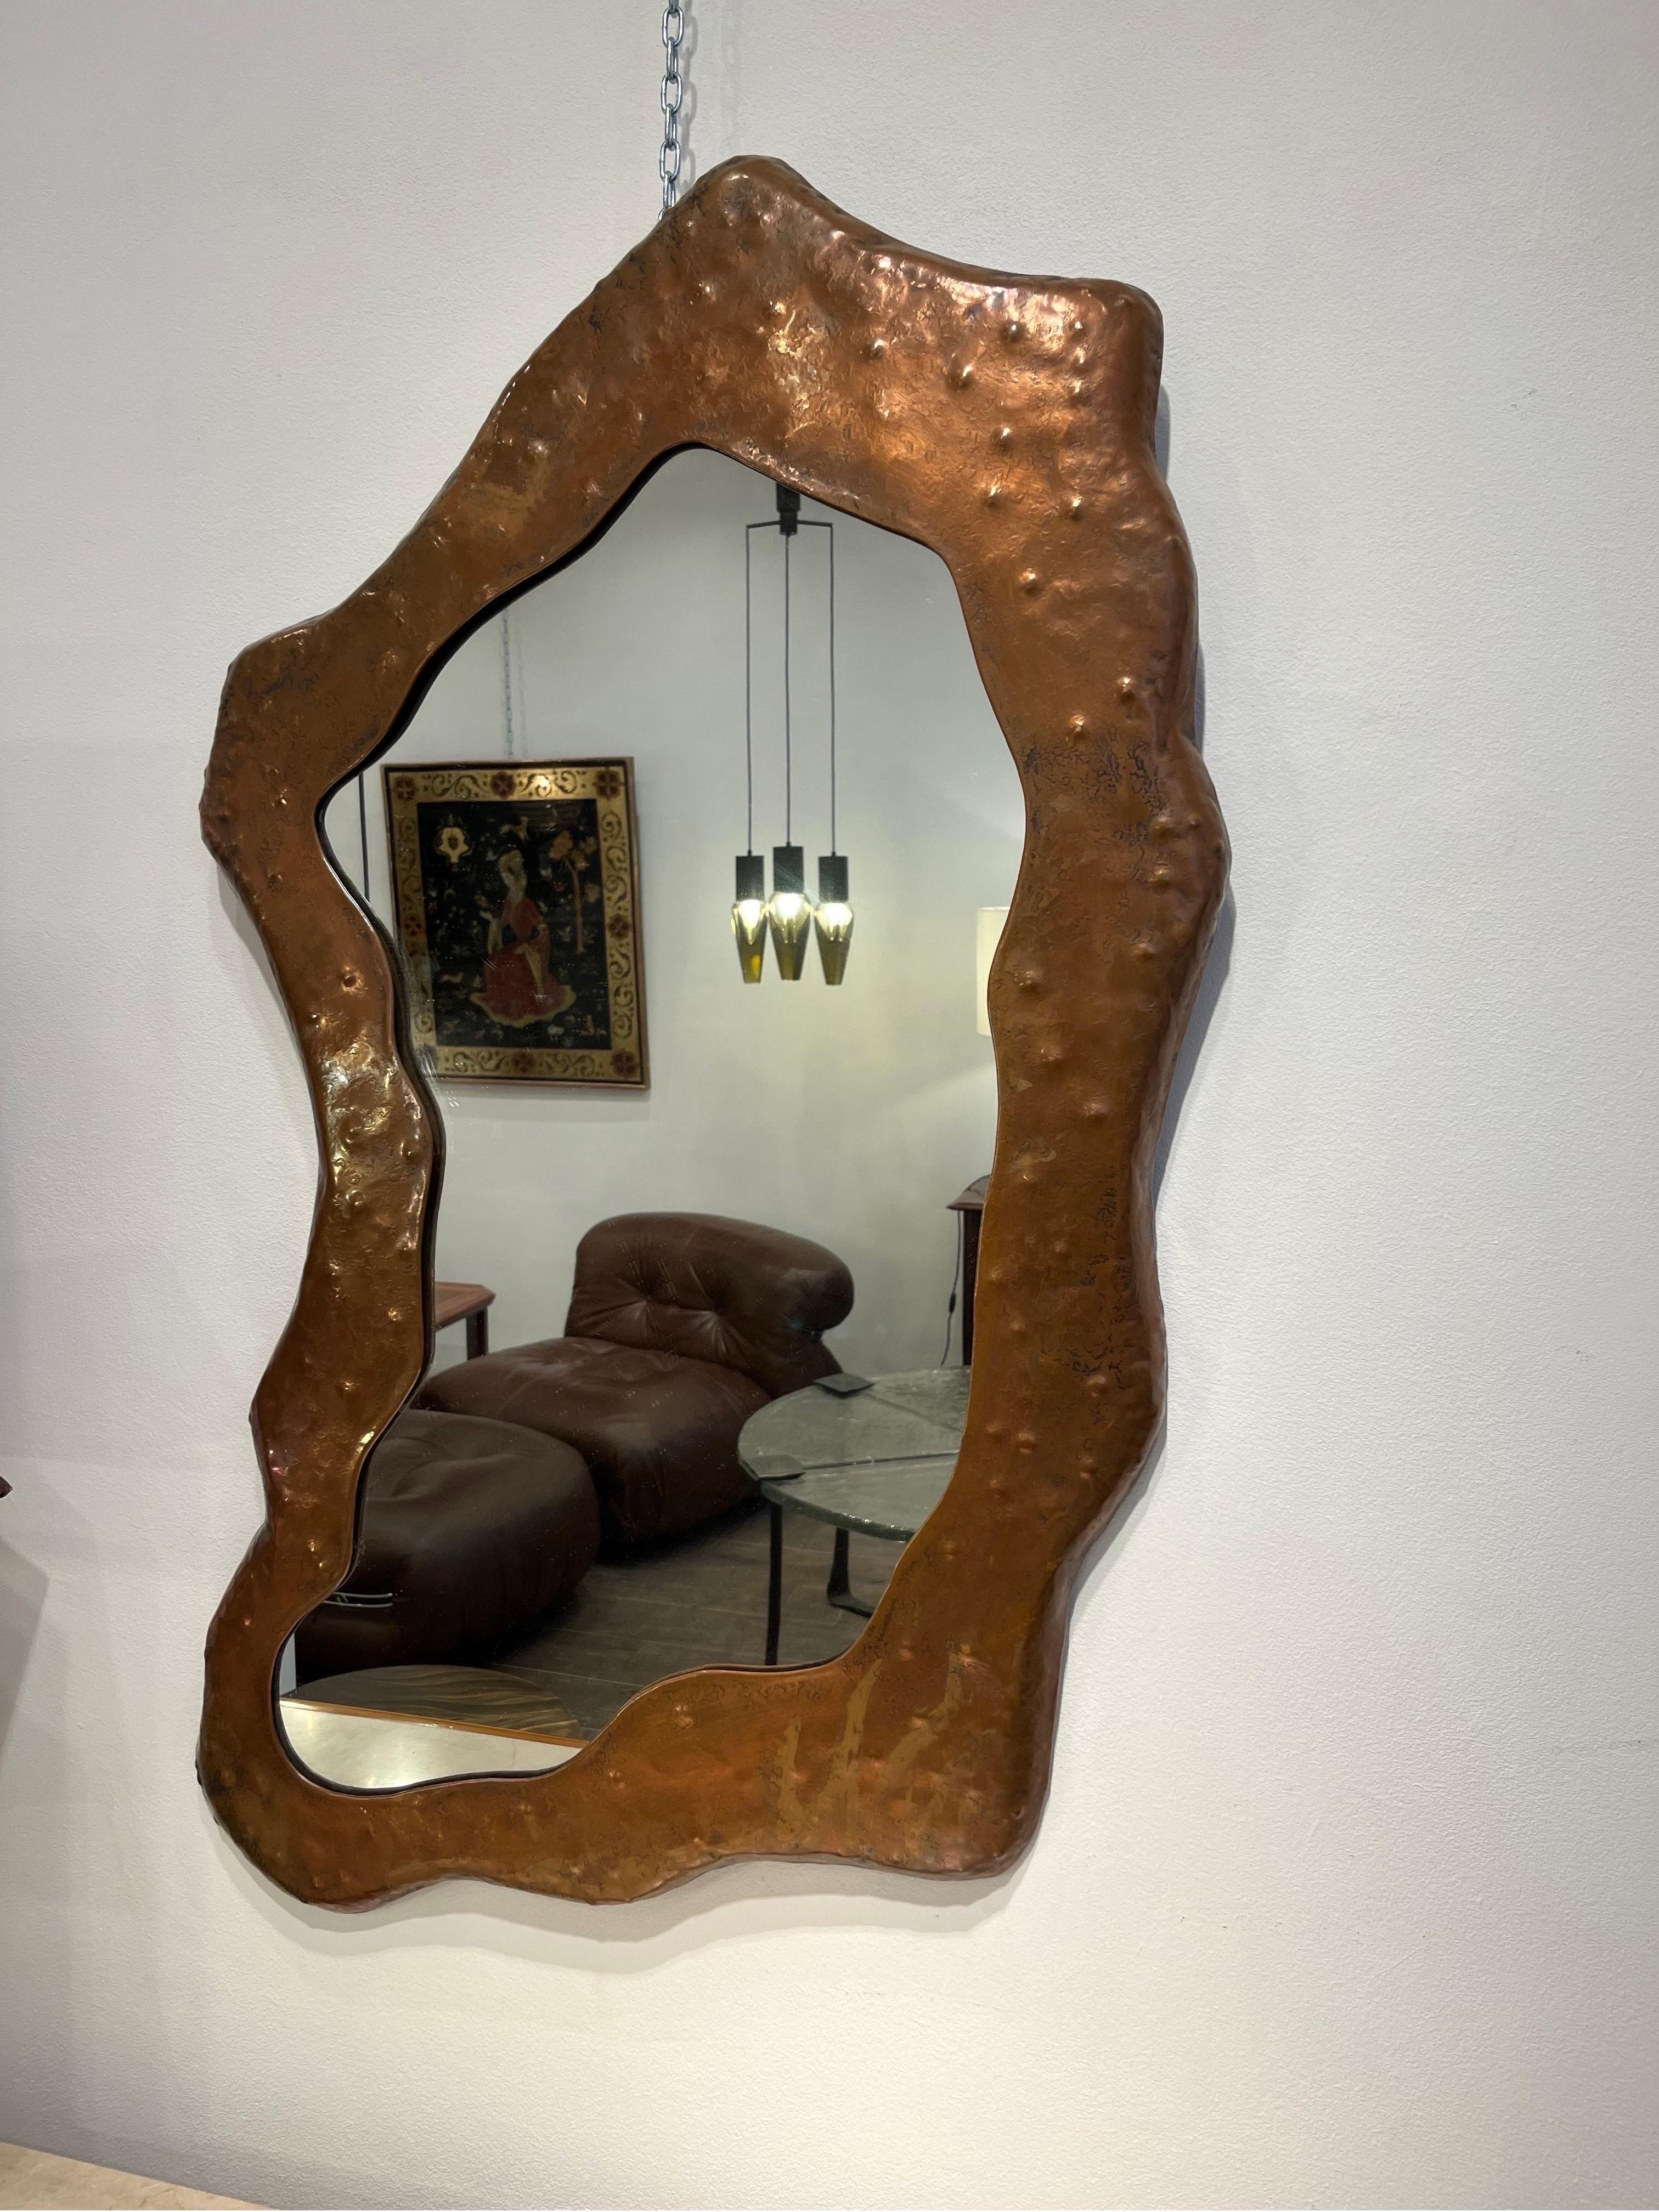 Angelo Bragalini is an Italian designer active in the 1960s-1970s. He mostly designed mirrors in copper. This particular mirror is interesting for its asymmetrical shape. The metal is repoussé to achieve the form and hammered to give some relief and